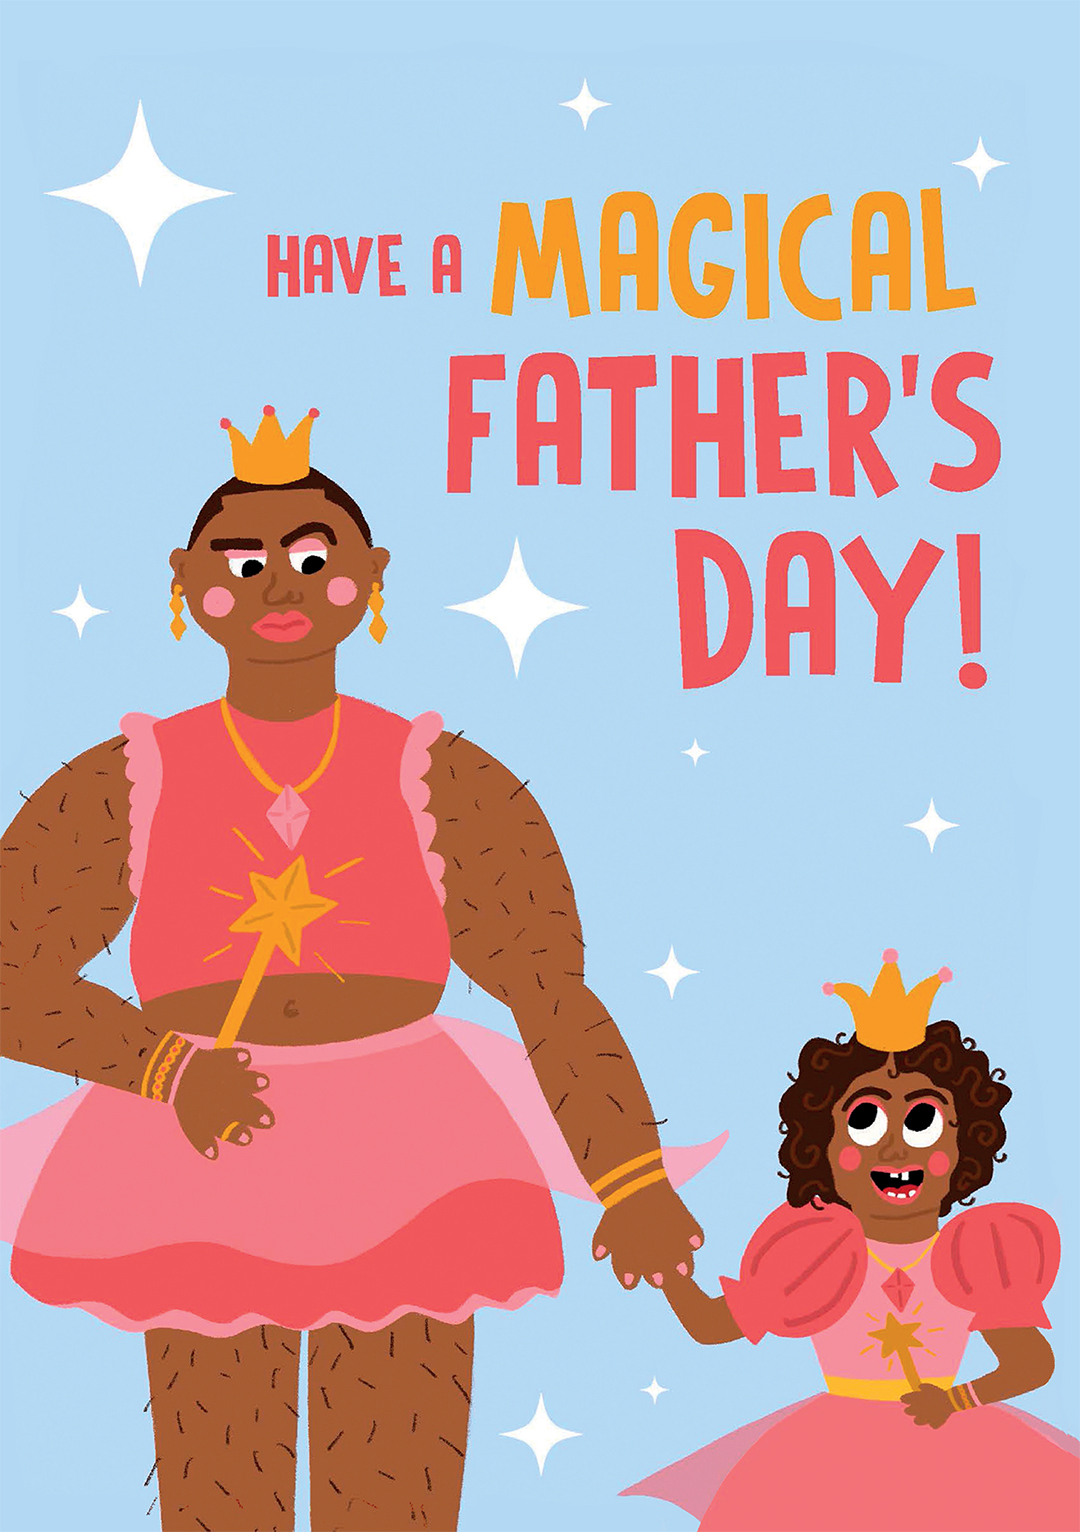 Have A Magical Father's Day!